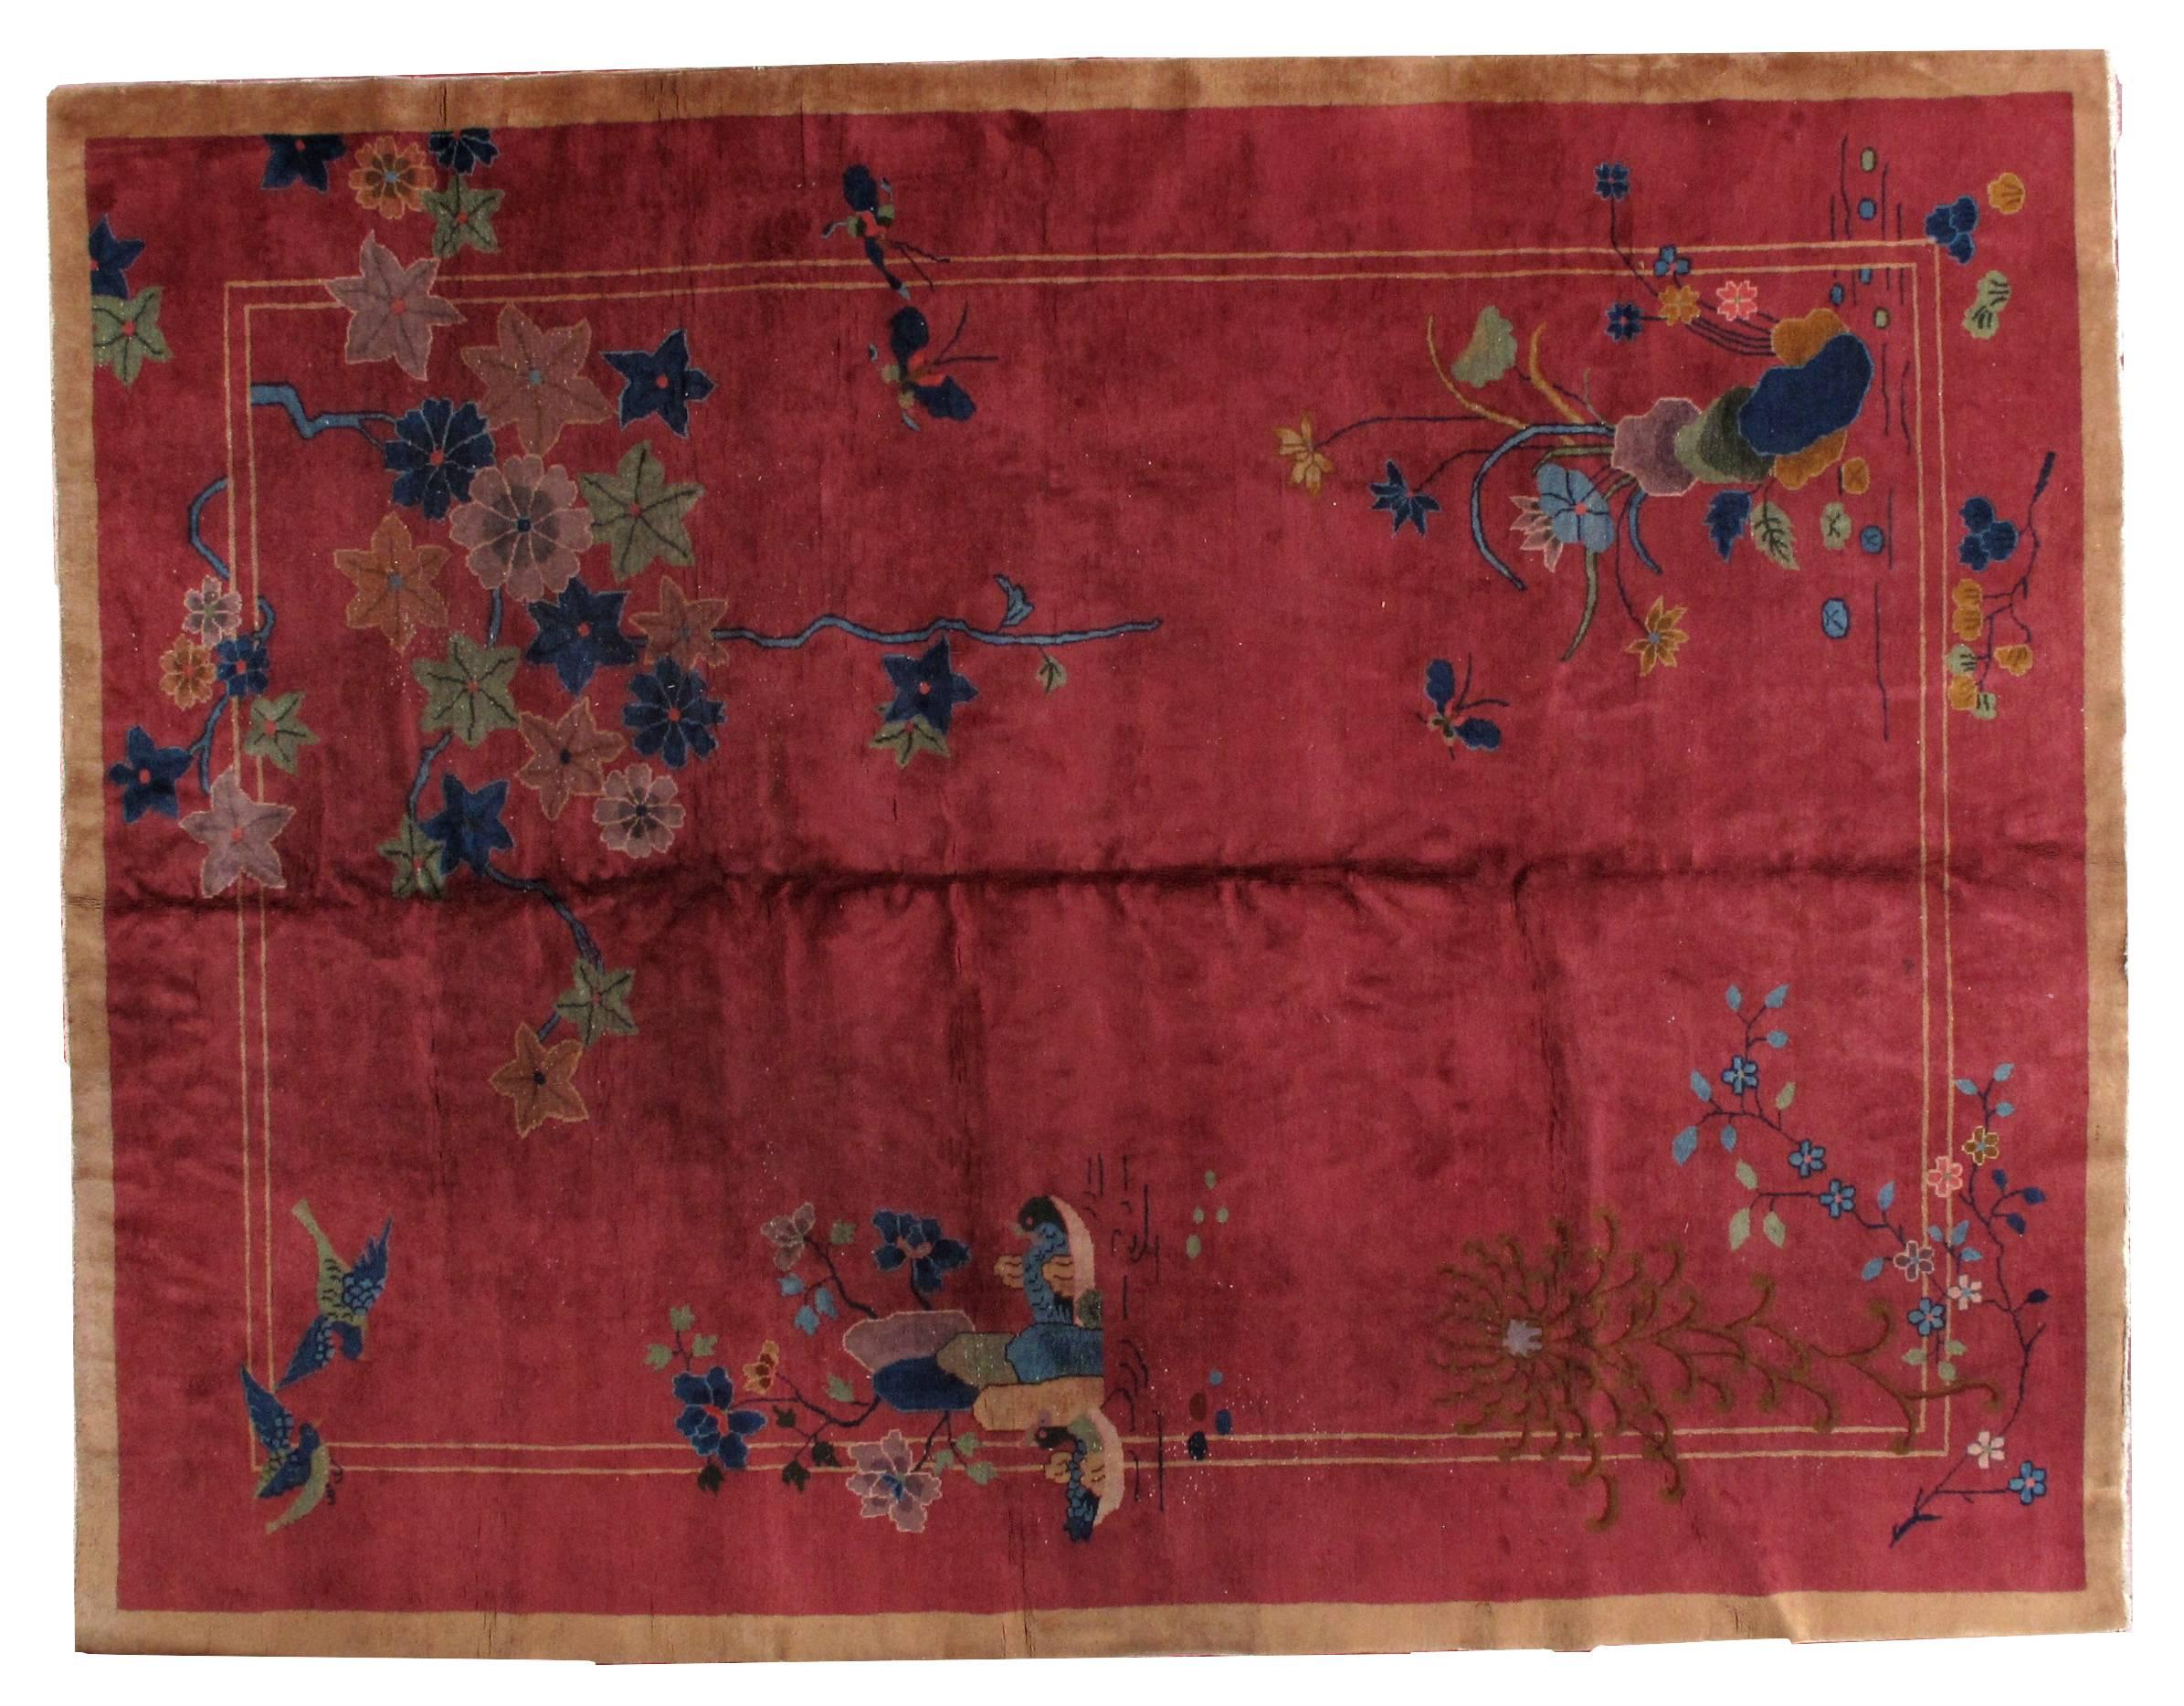 Antique Art Deco Chinese rug in original condition. The rug is in scarlet color with some red shade on it. The rug has beautiful decorative design mixed with floral. There some birds and butterflies imaged on the rug. Dominating colors on the rug: